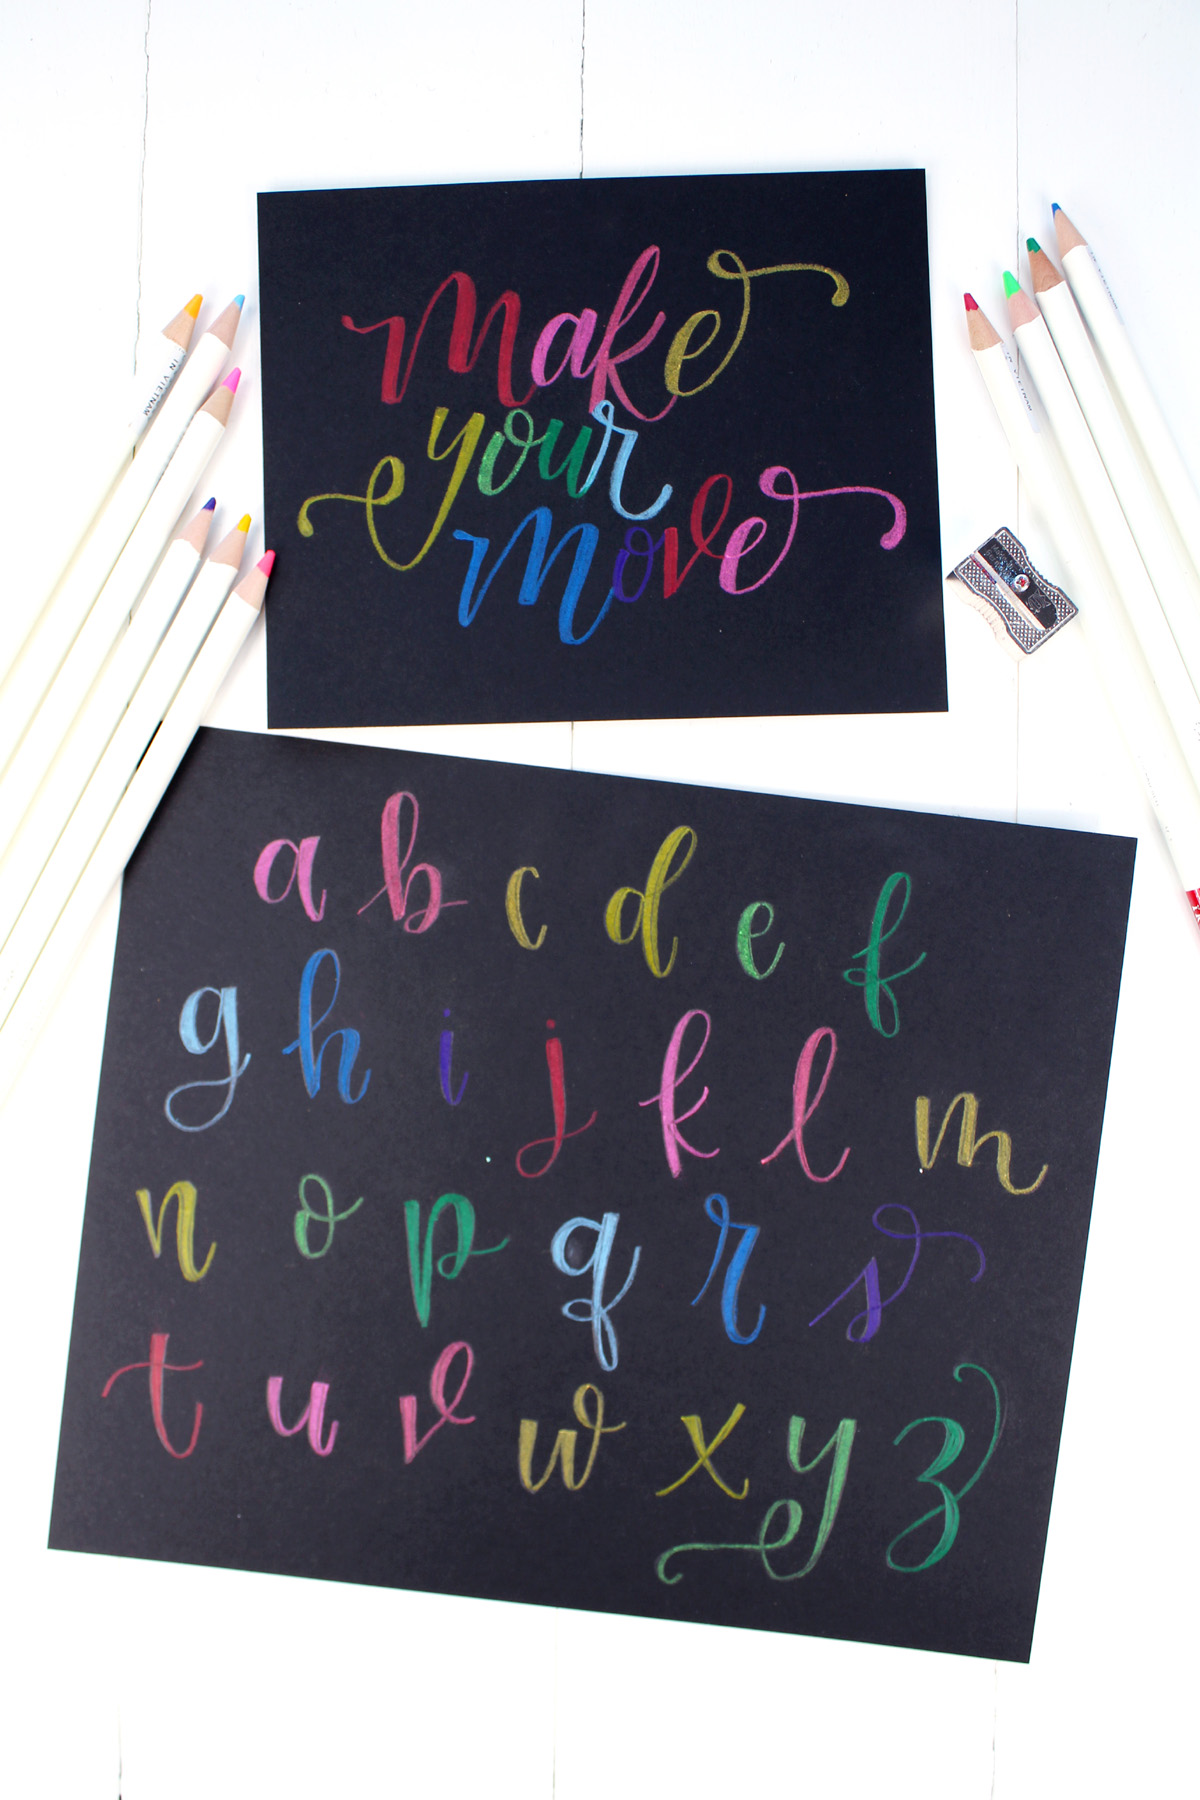 Learn bounce lettering using Tombow Irojiten Colored Pencils to create stunning works of art; perfect for handmade cards, home decor or other papercrafting.